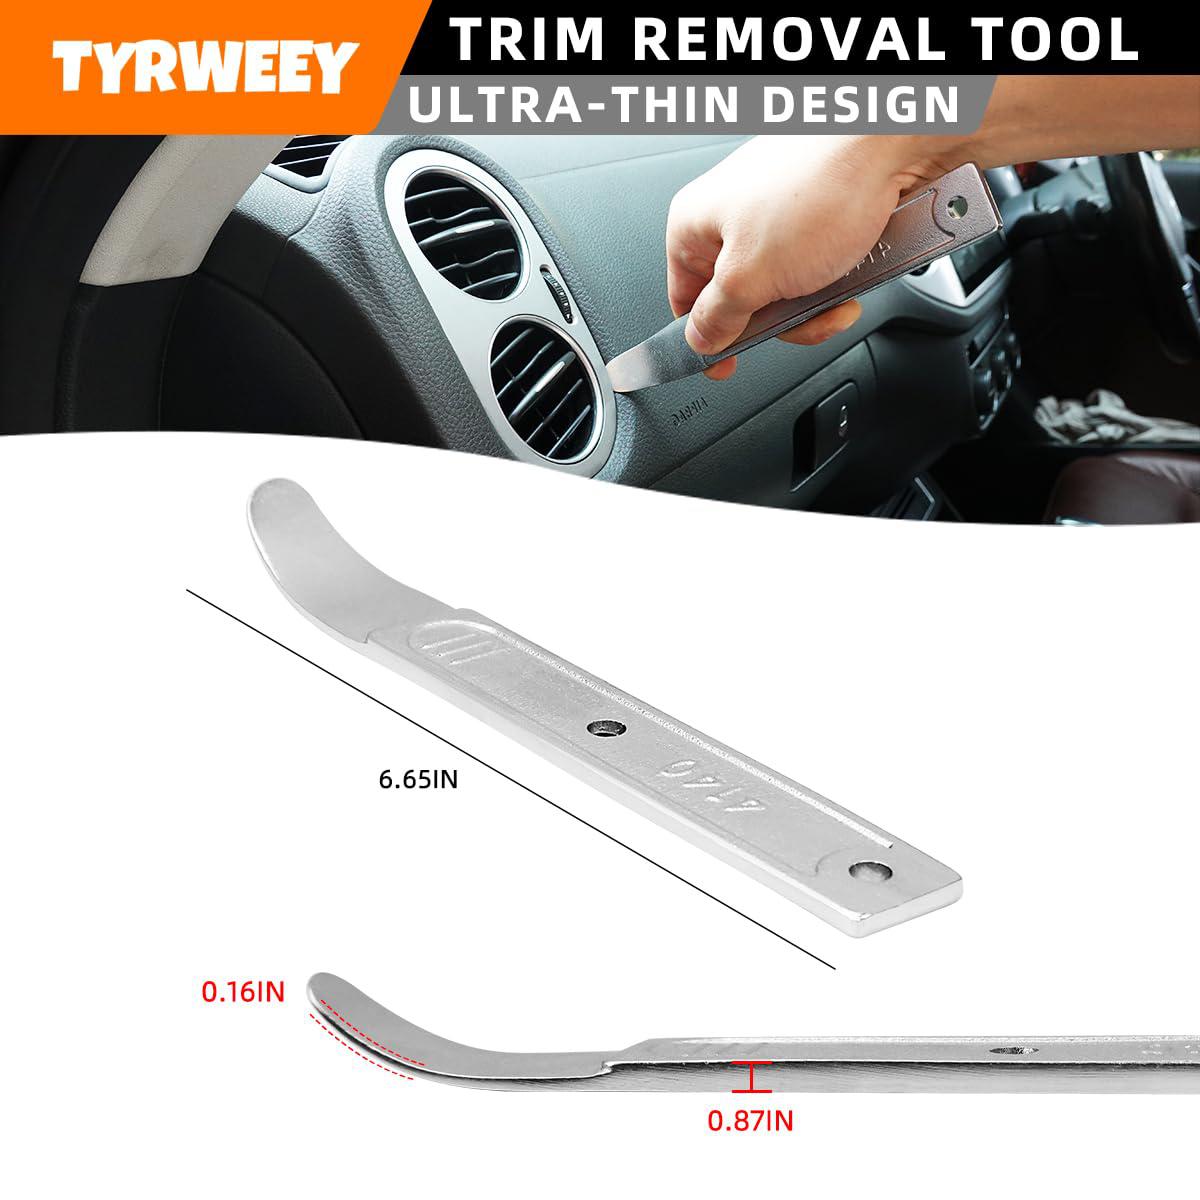 tyrweey 4140 pry tool, pry bar trim removal tool, pry tool, pocket pry bar, car trim removal tool kit, trim removal tool kit,